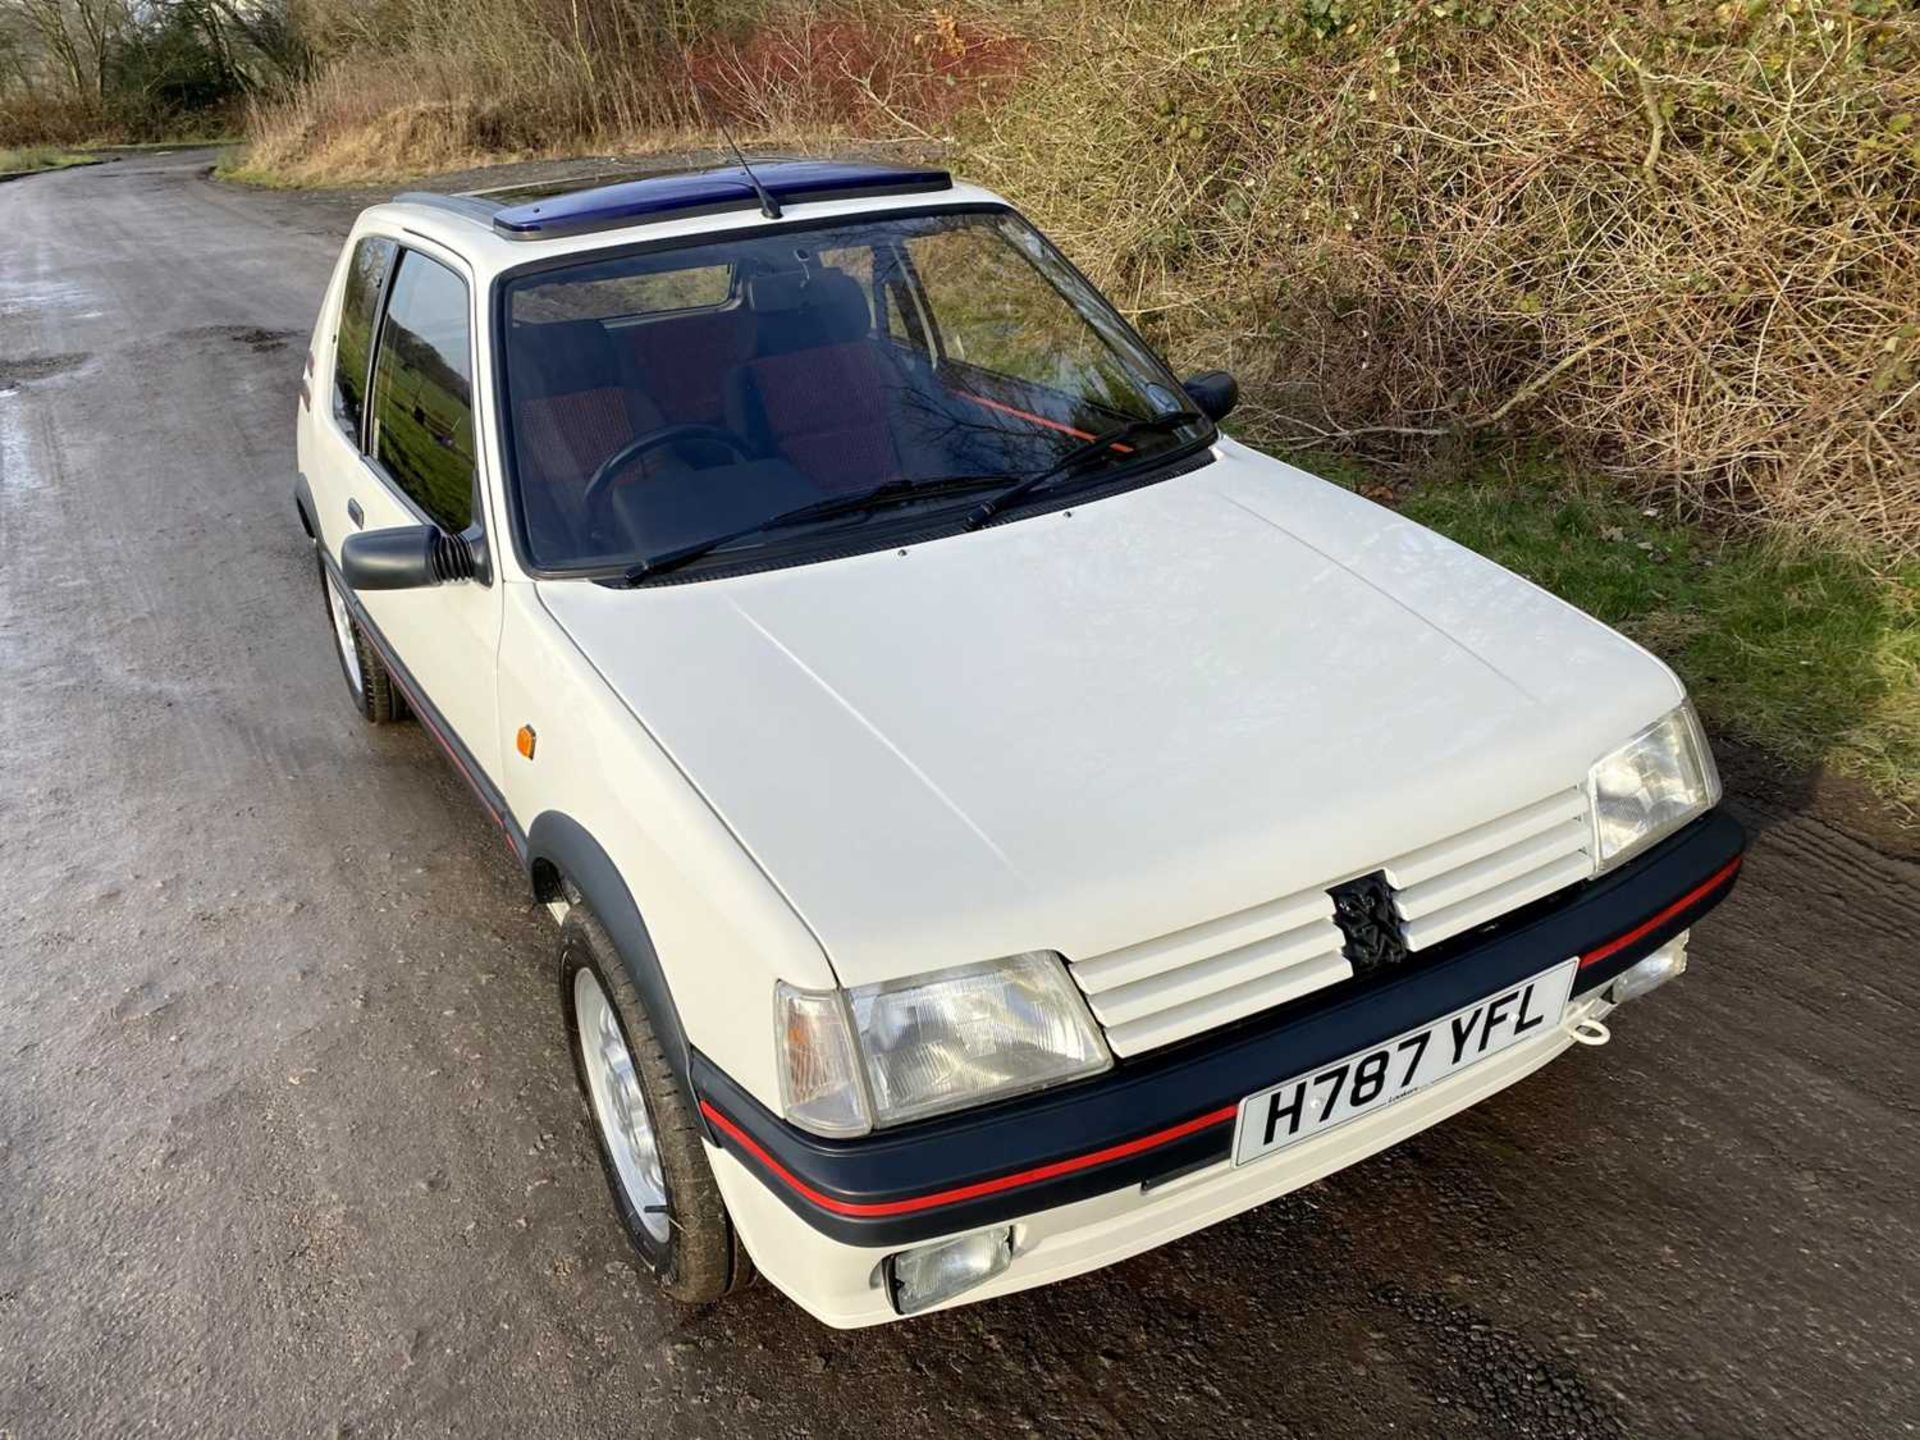 1990 Peugeot 205 GTi 1.6 Only 56,000 miles, same owner for 16 years - Image 7 of 81